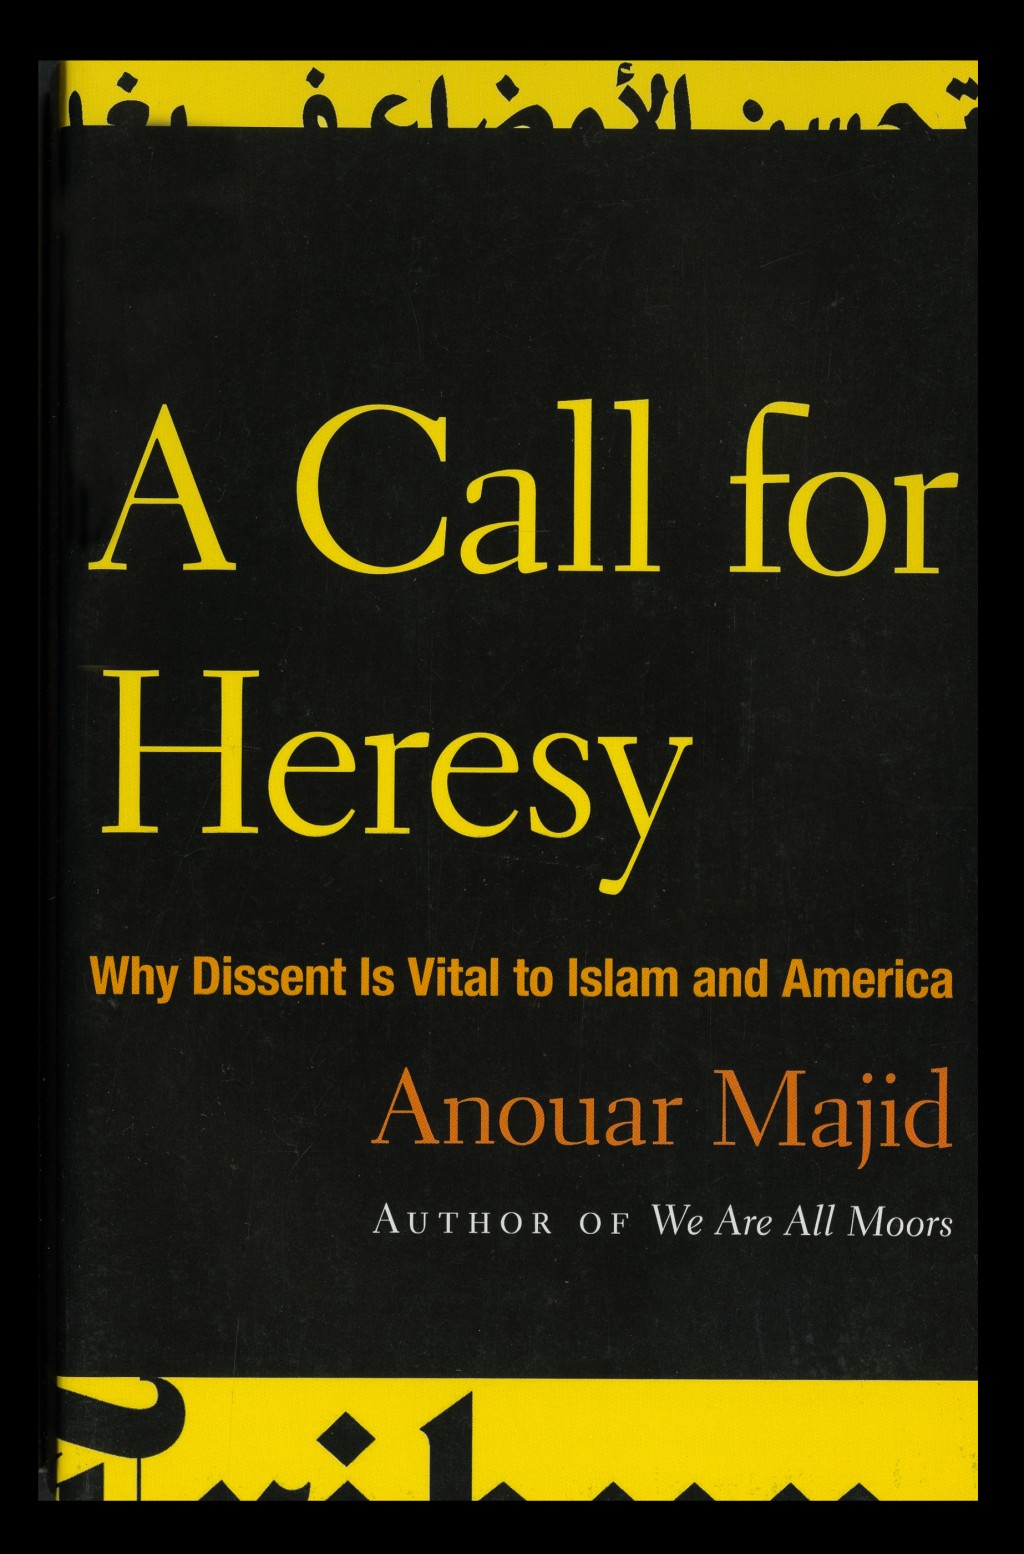 The article describes Majid’s book as “a quite illuminating analysis of the need for heresy in Islam.”